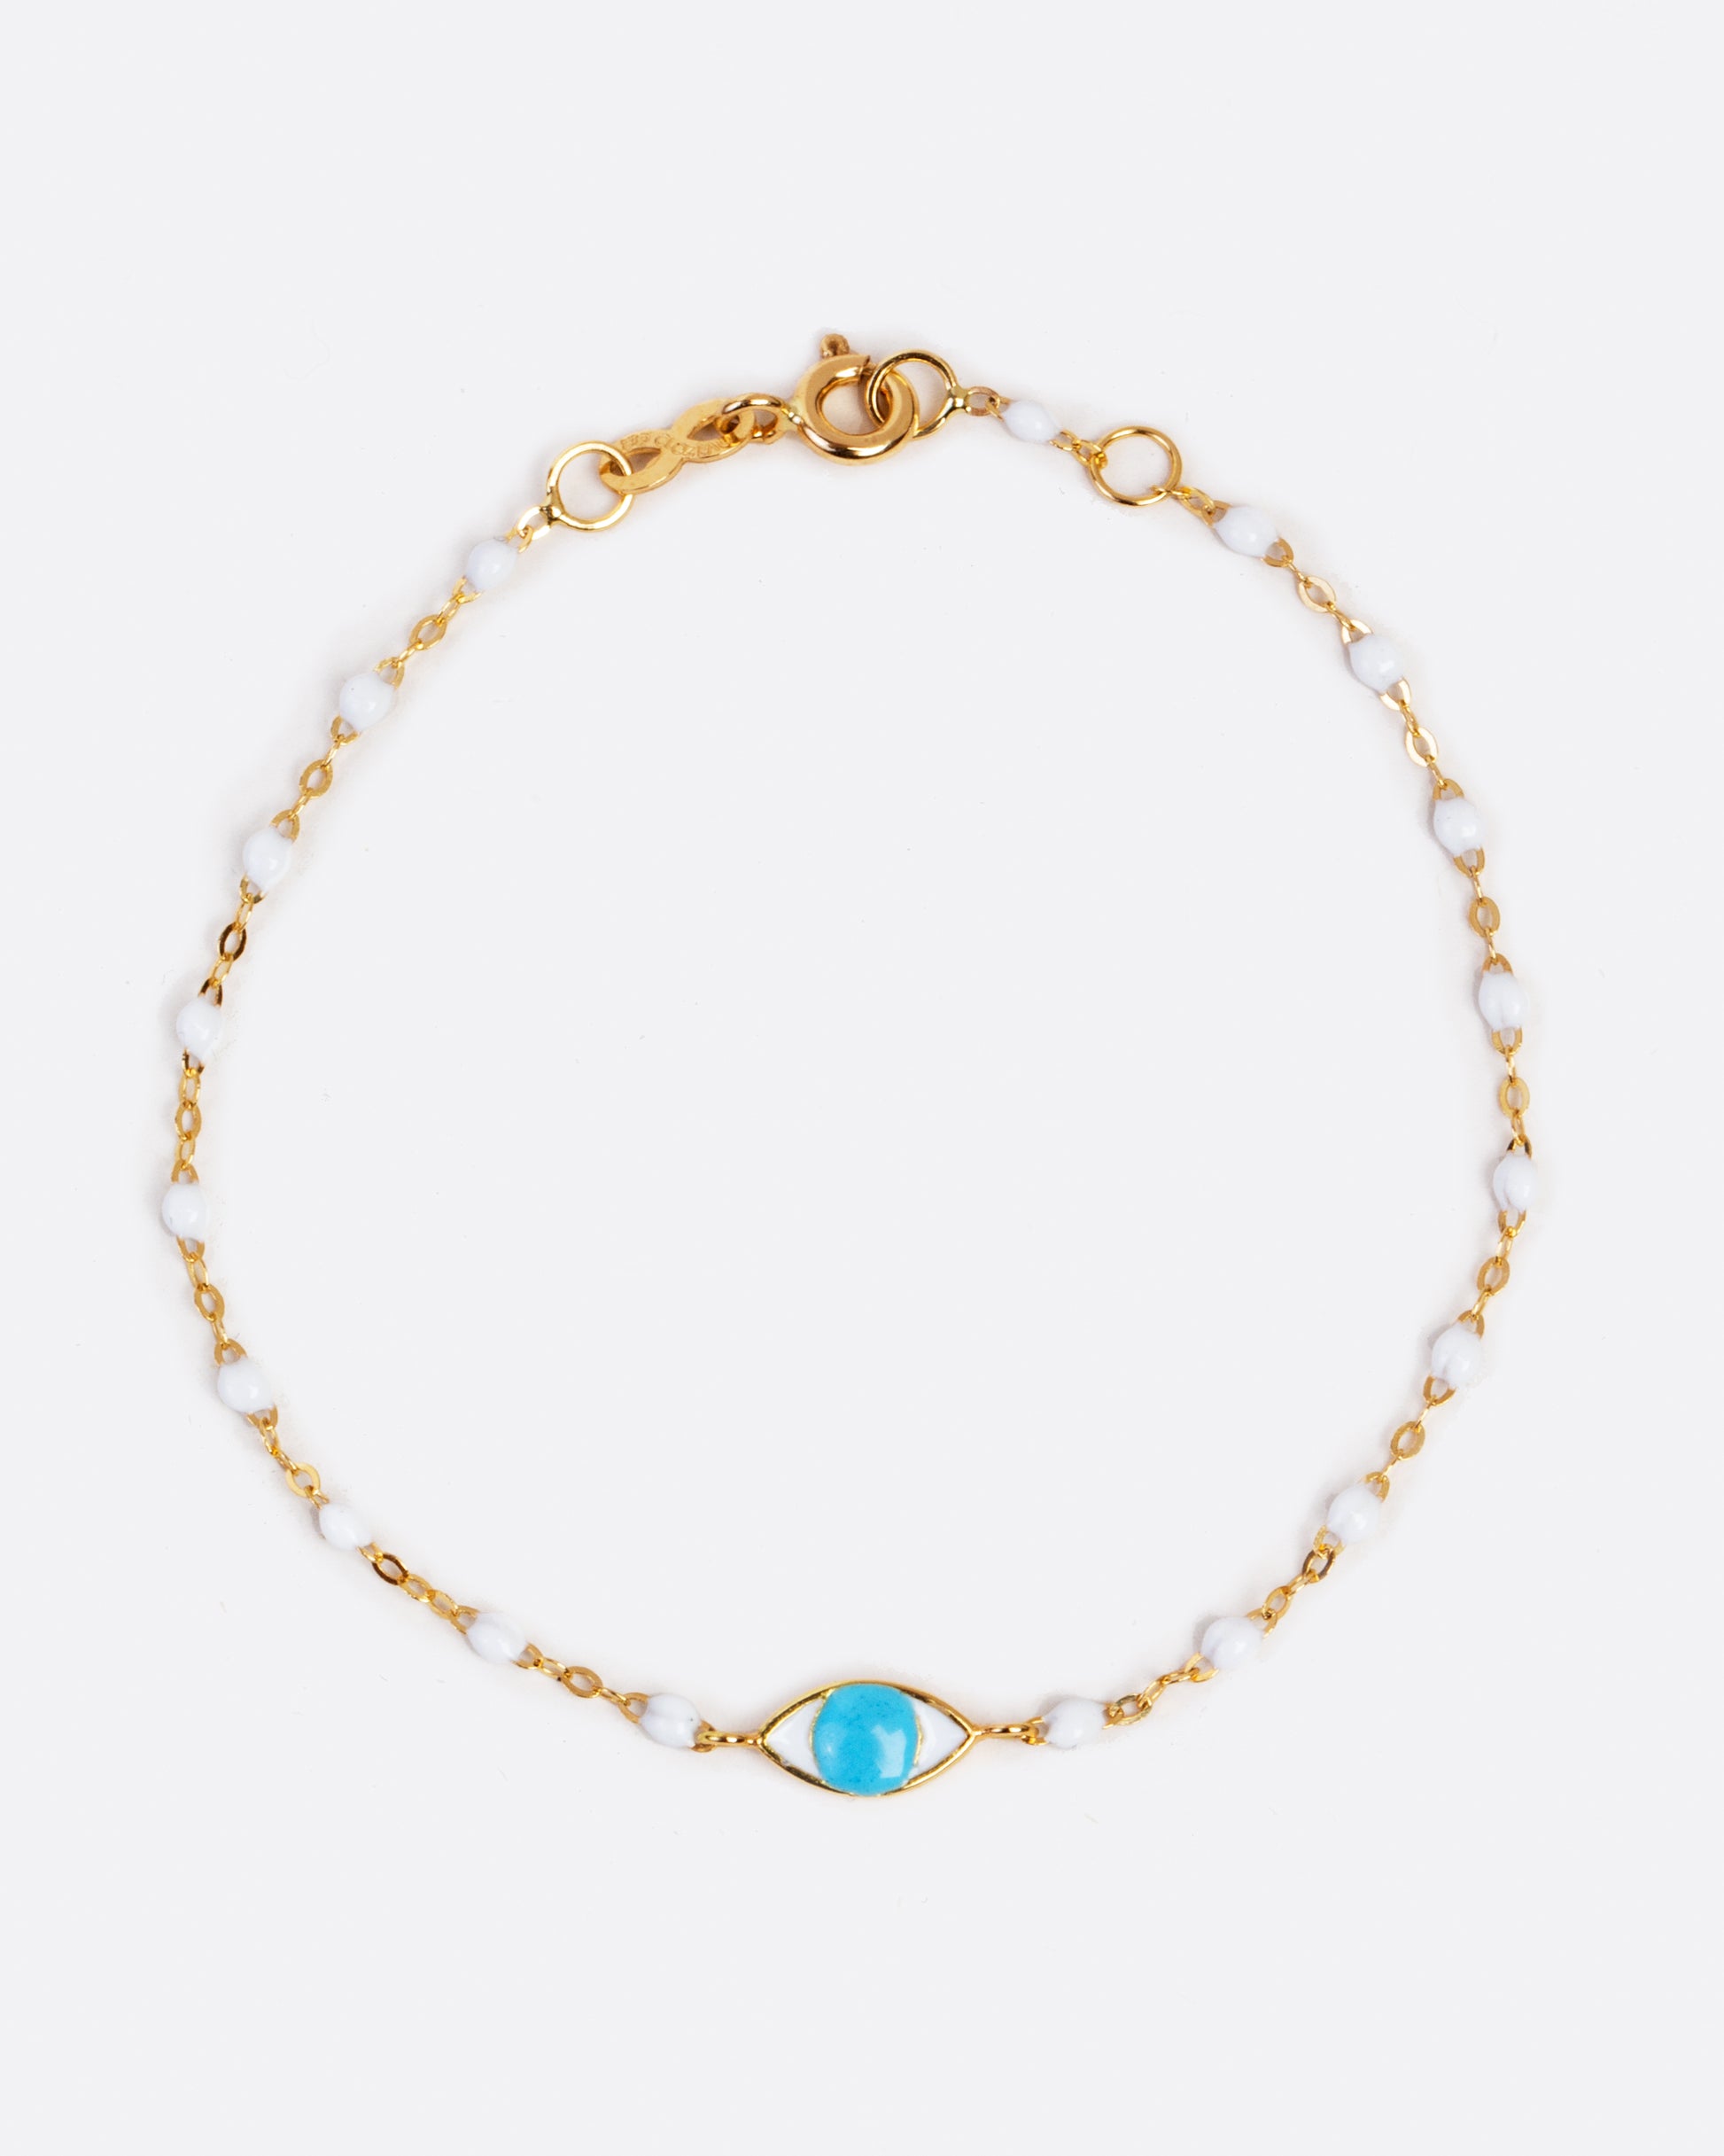 Yellow gold bracelet dipped in white resin, to create a beaded effect. In the middle is an eye charm with a blue resin iris.